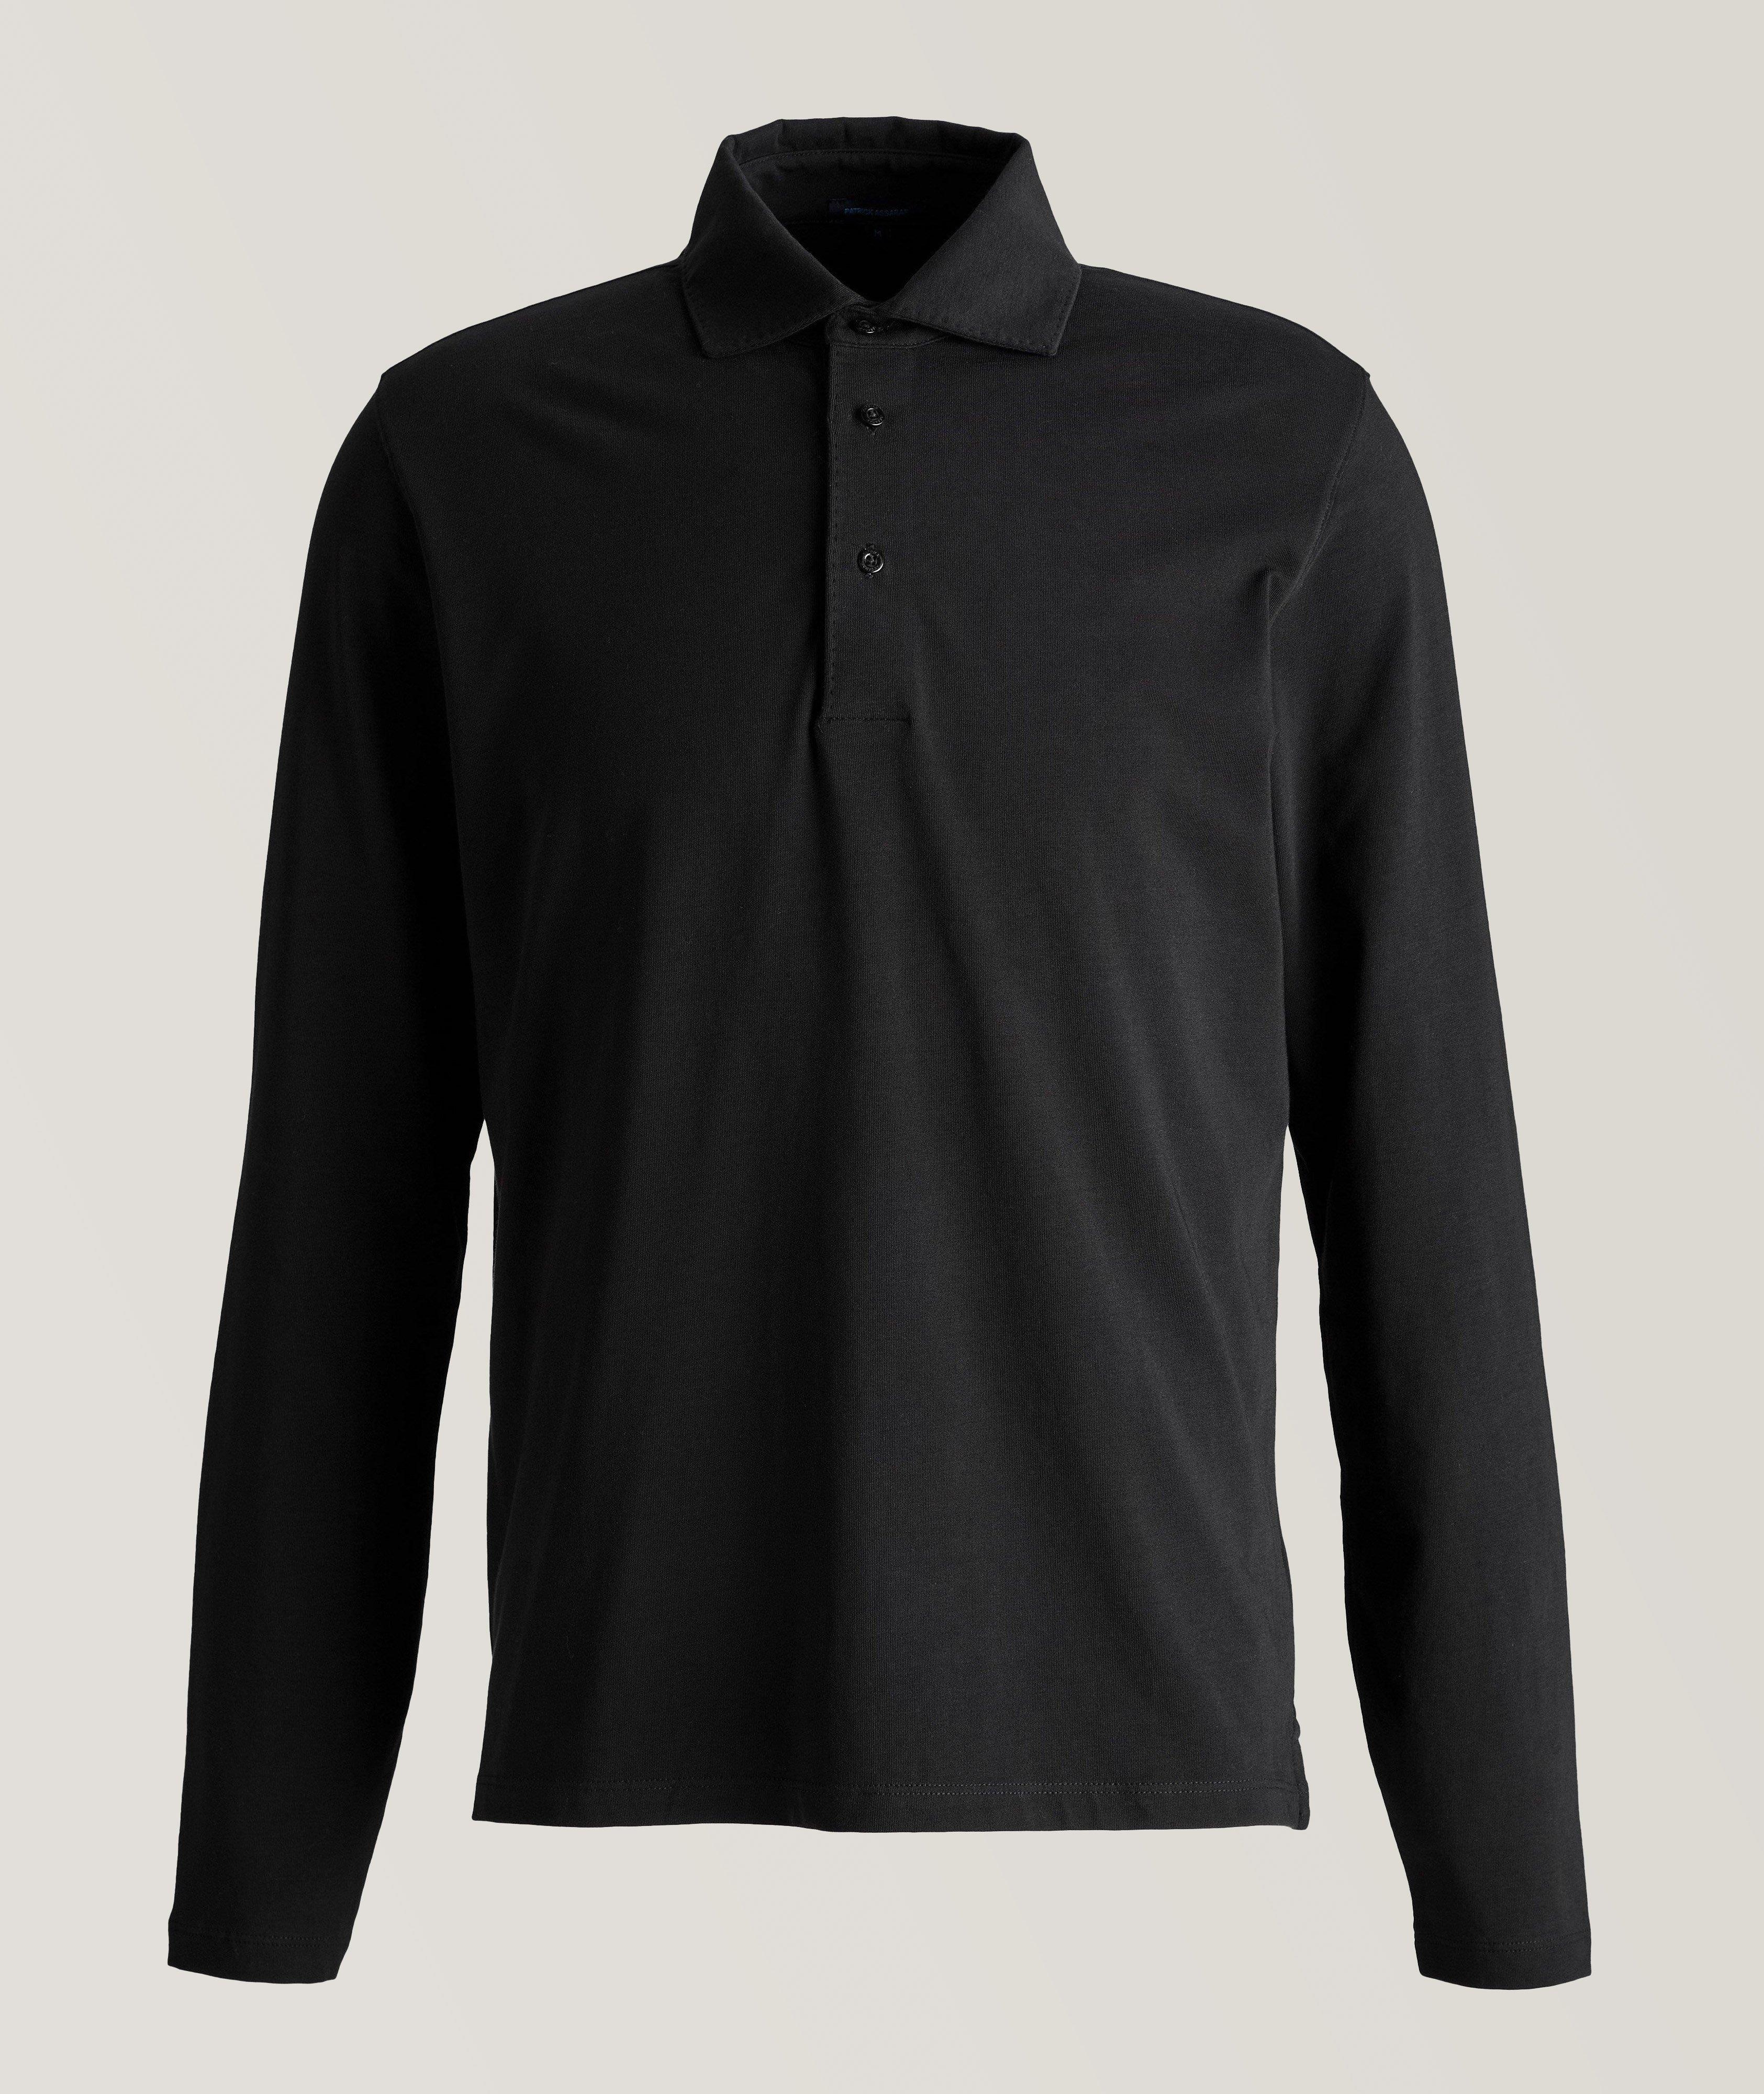 Long-Sleeve Stretch-Cotton Polo image 0